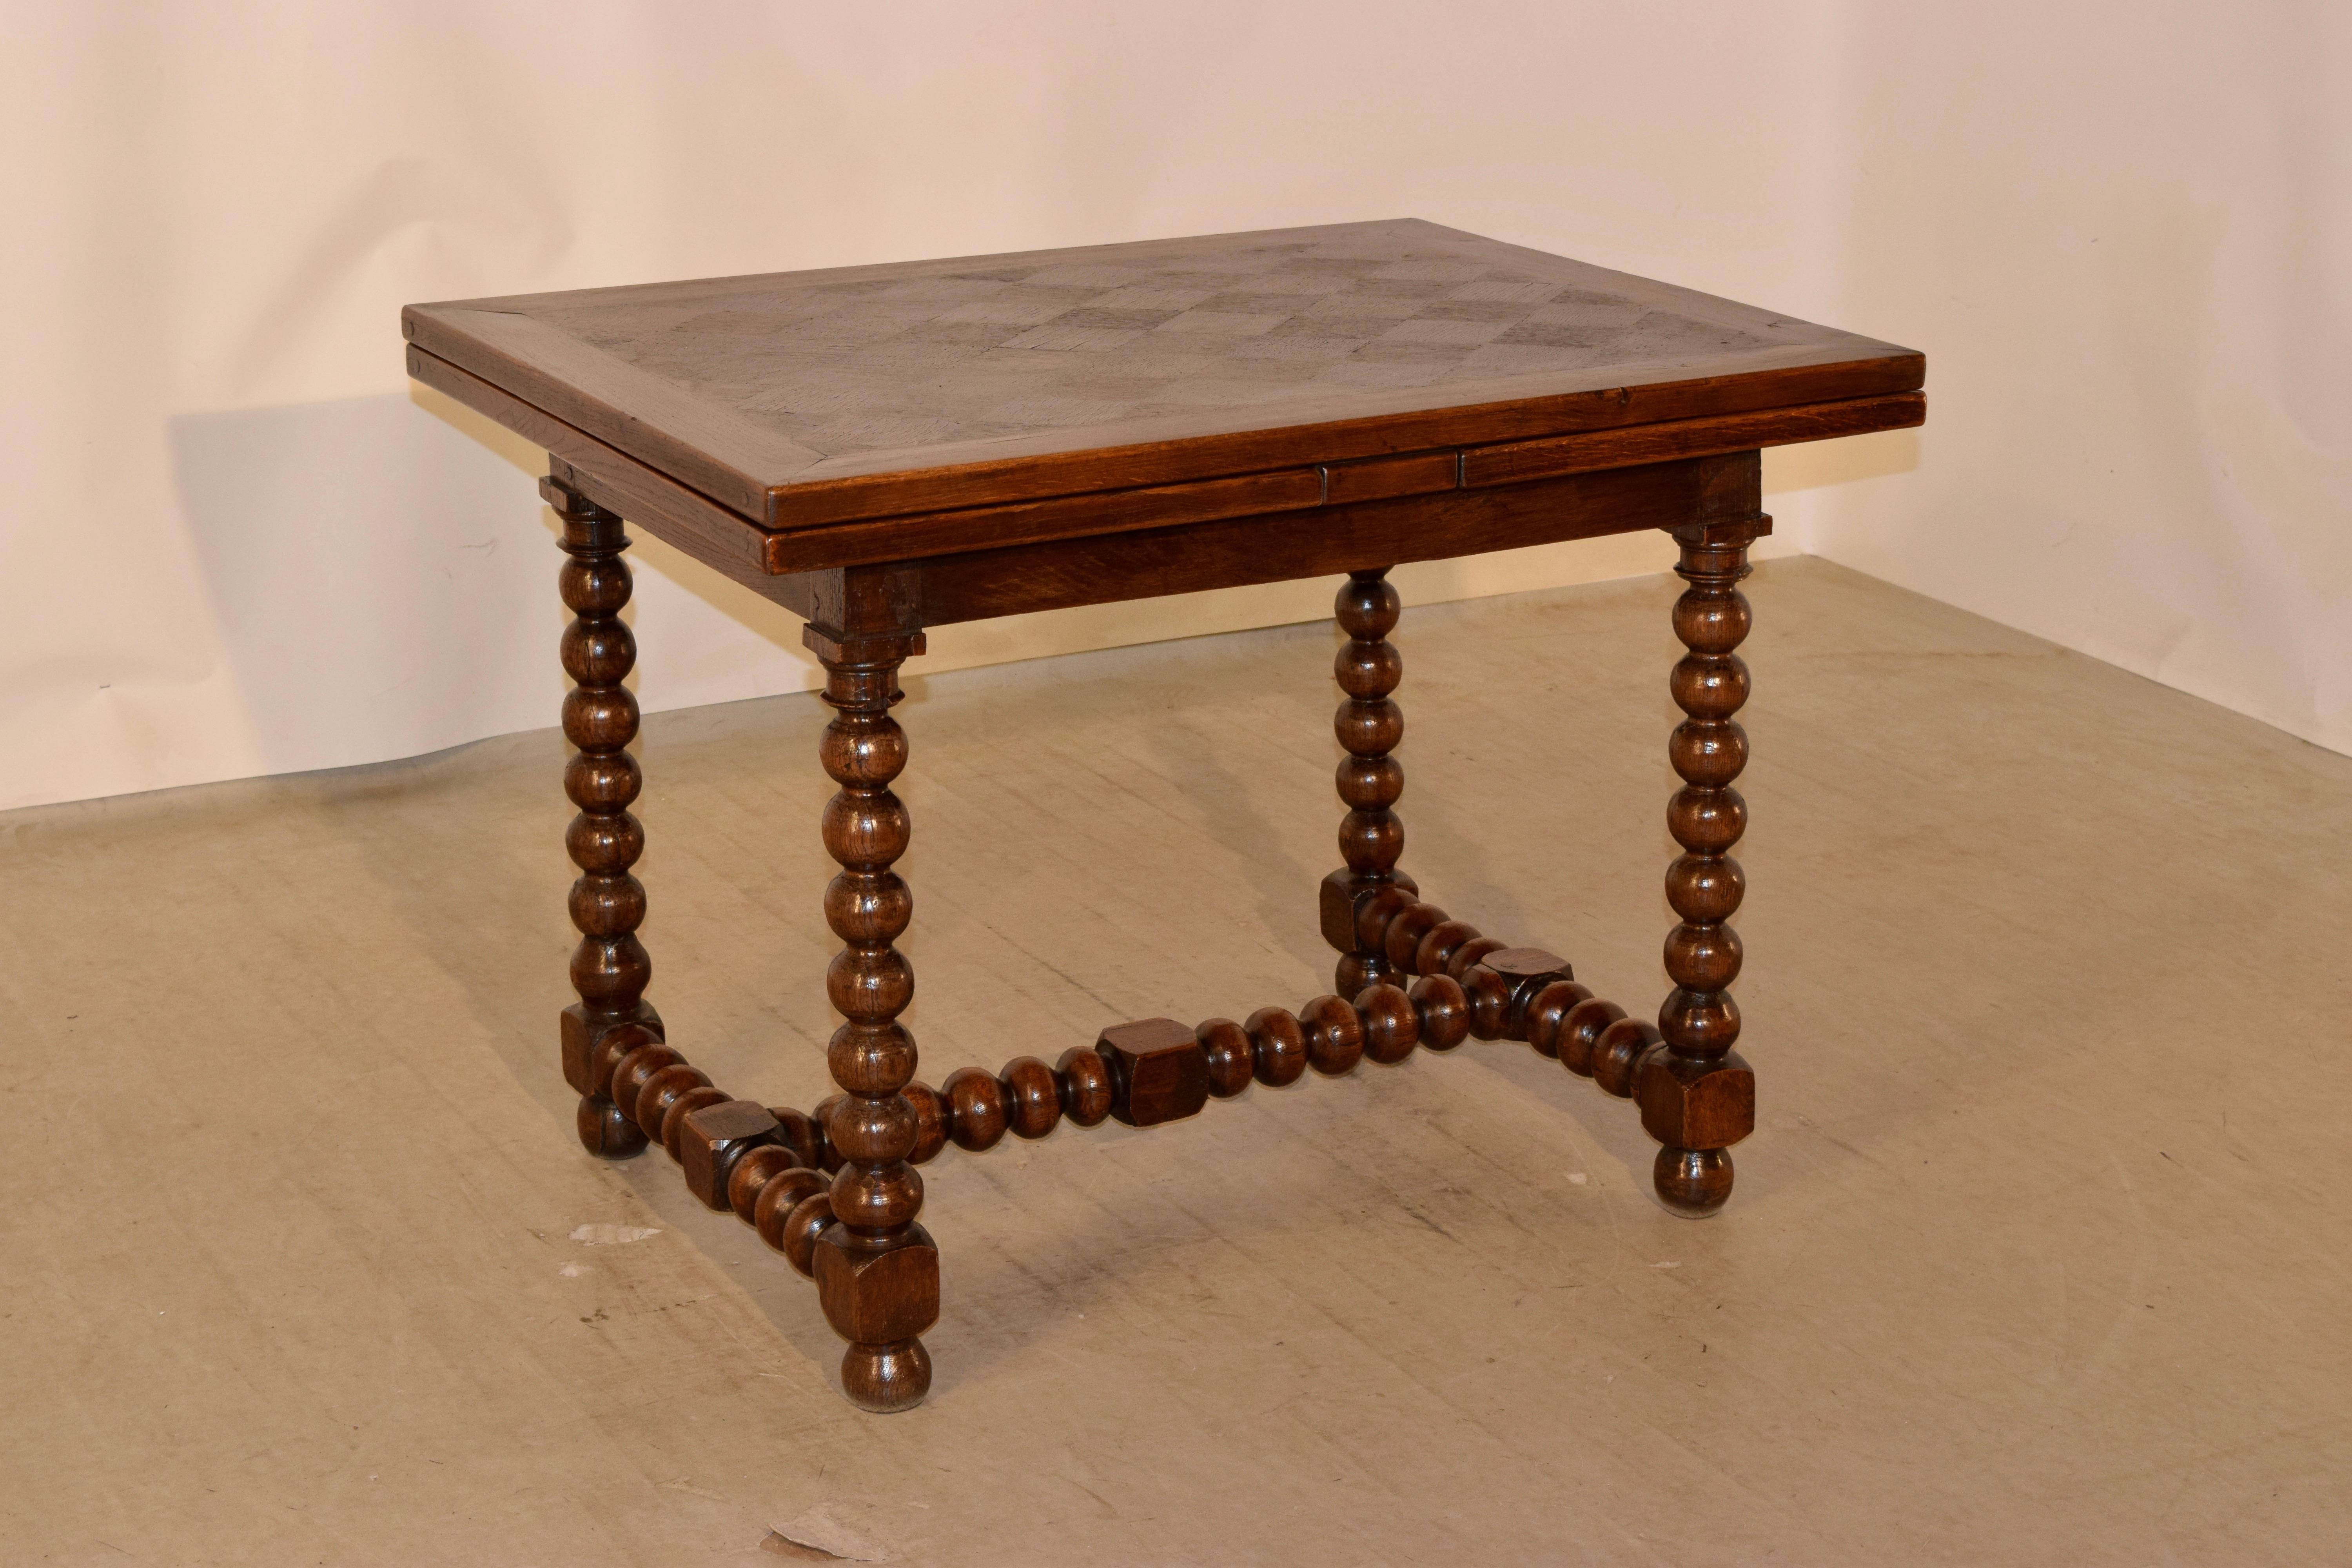 19th century oak draw leaf table from France. The top and leaves have lovely parqueted central banded panels, following down to a simple apron and supported on hand-turned bobbin pattern legs, joined by matching stretchers. Raised on hand-turned